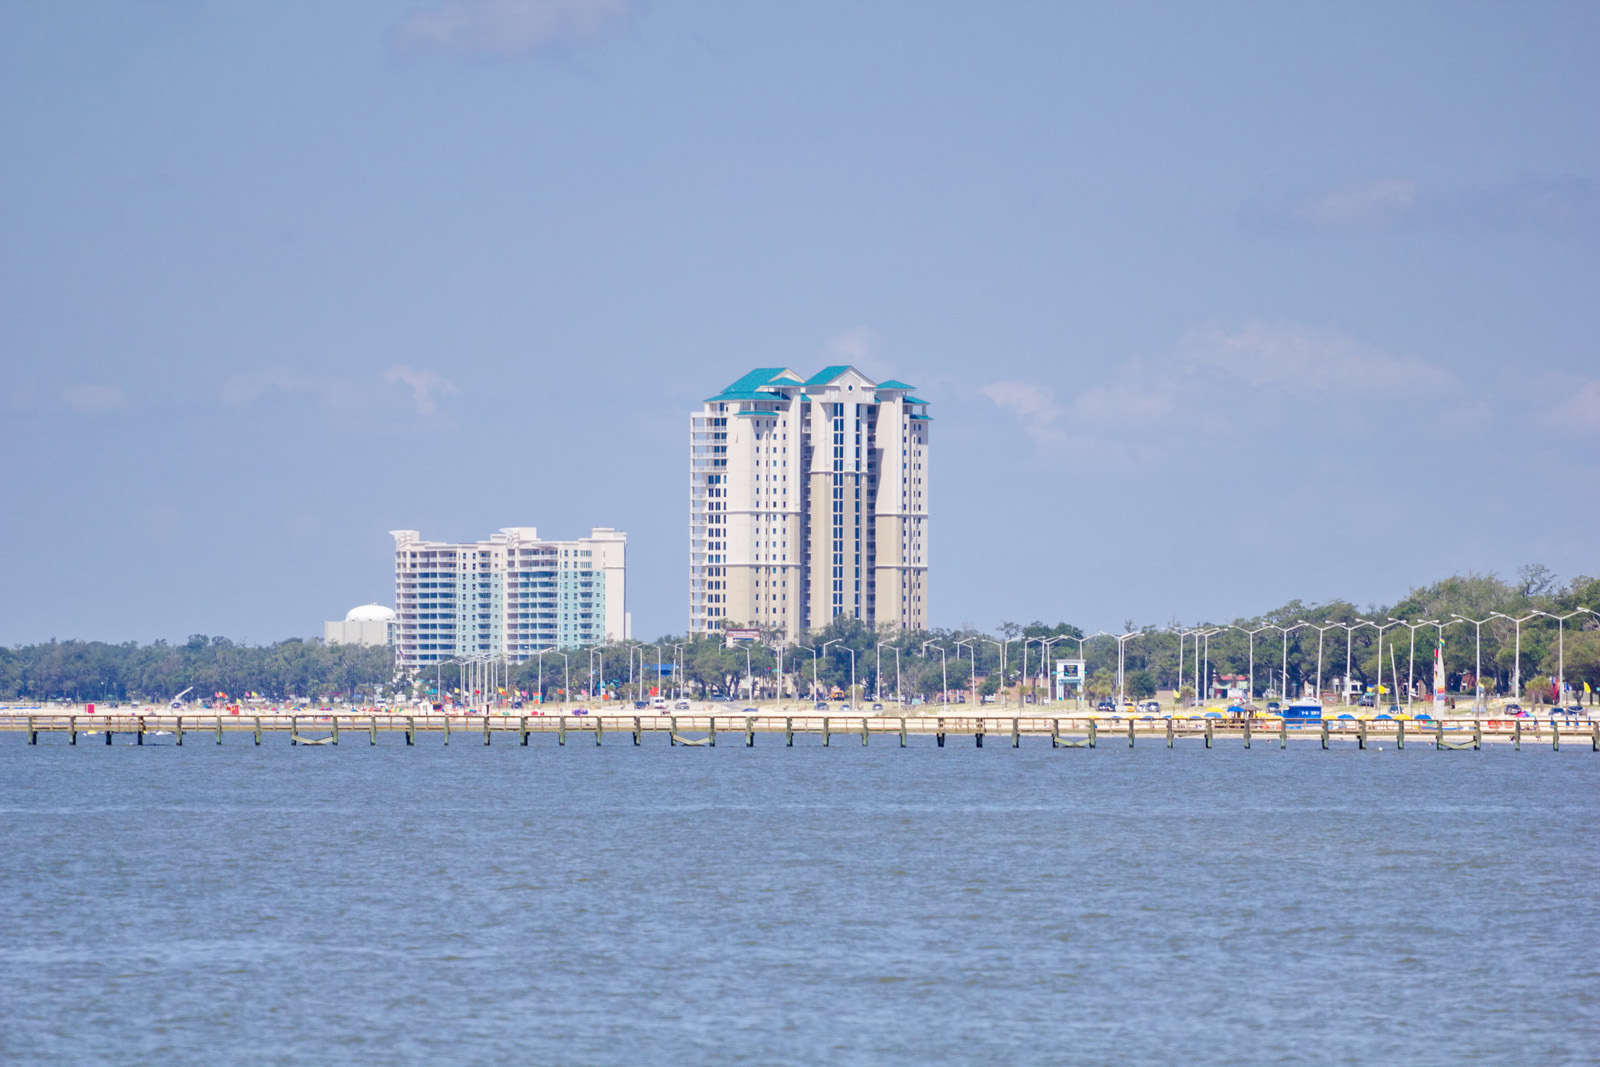 A view of the coast of Gulf of Mexico taken from Biloxi on the pier.